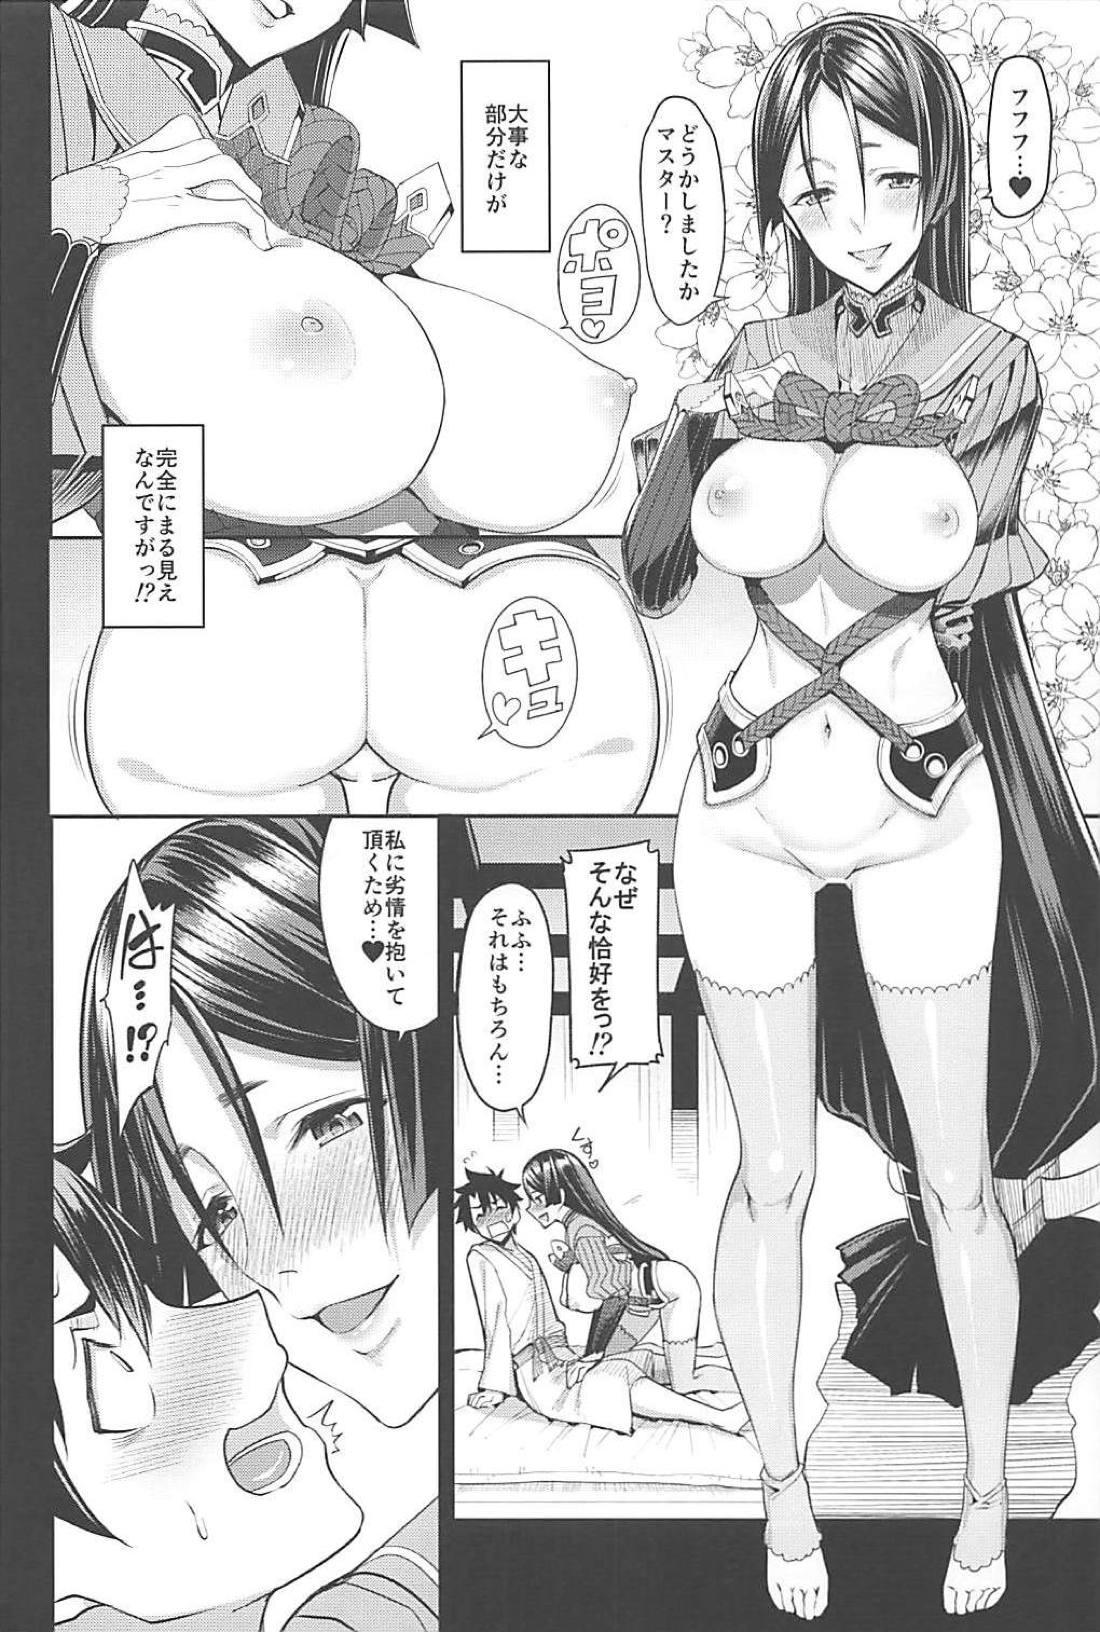 Sixtynine Another Personality - Fate grand order Brunet - Page 5